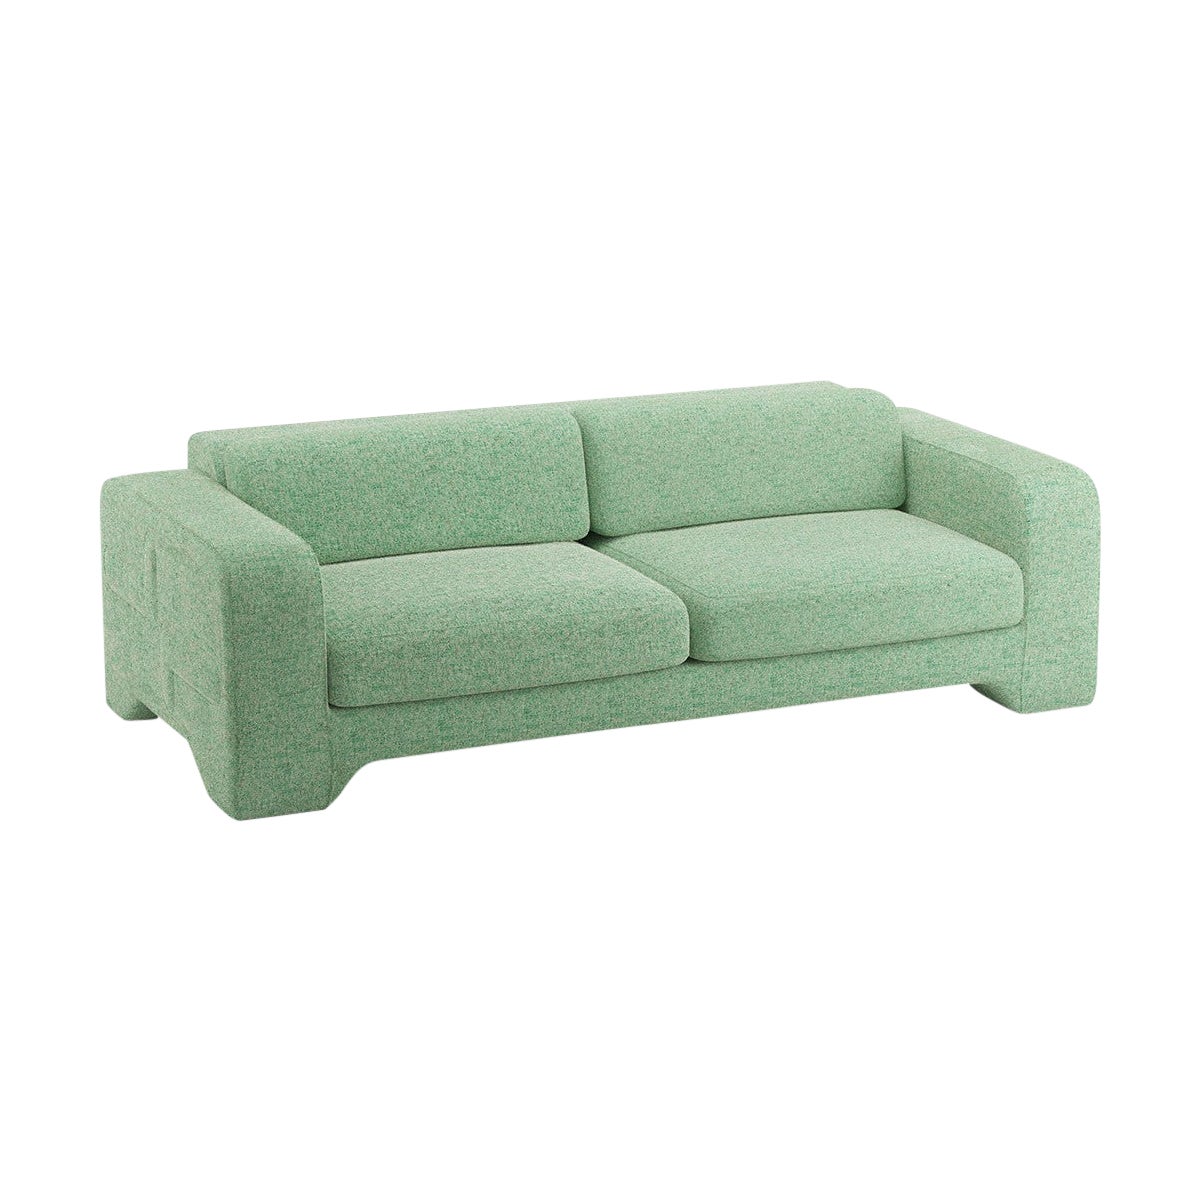 Popus Editions Giovanna 2.5 Seater Sofa in Emerald London Linen Fabric For Sale